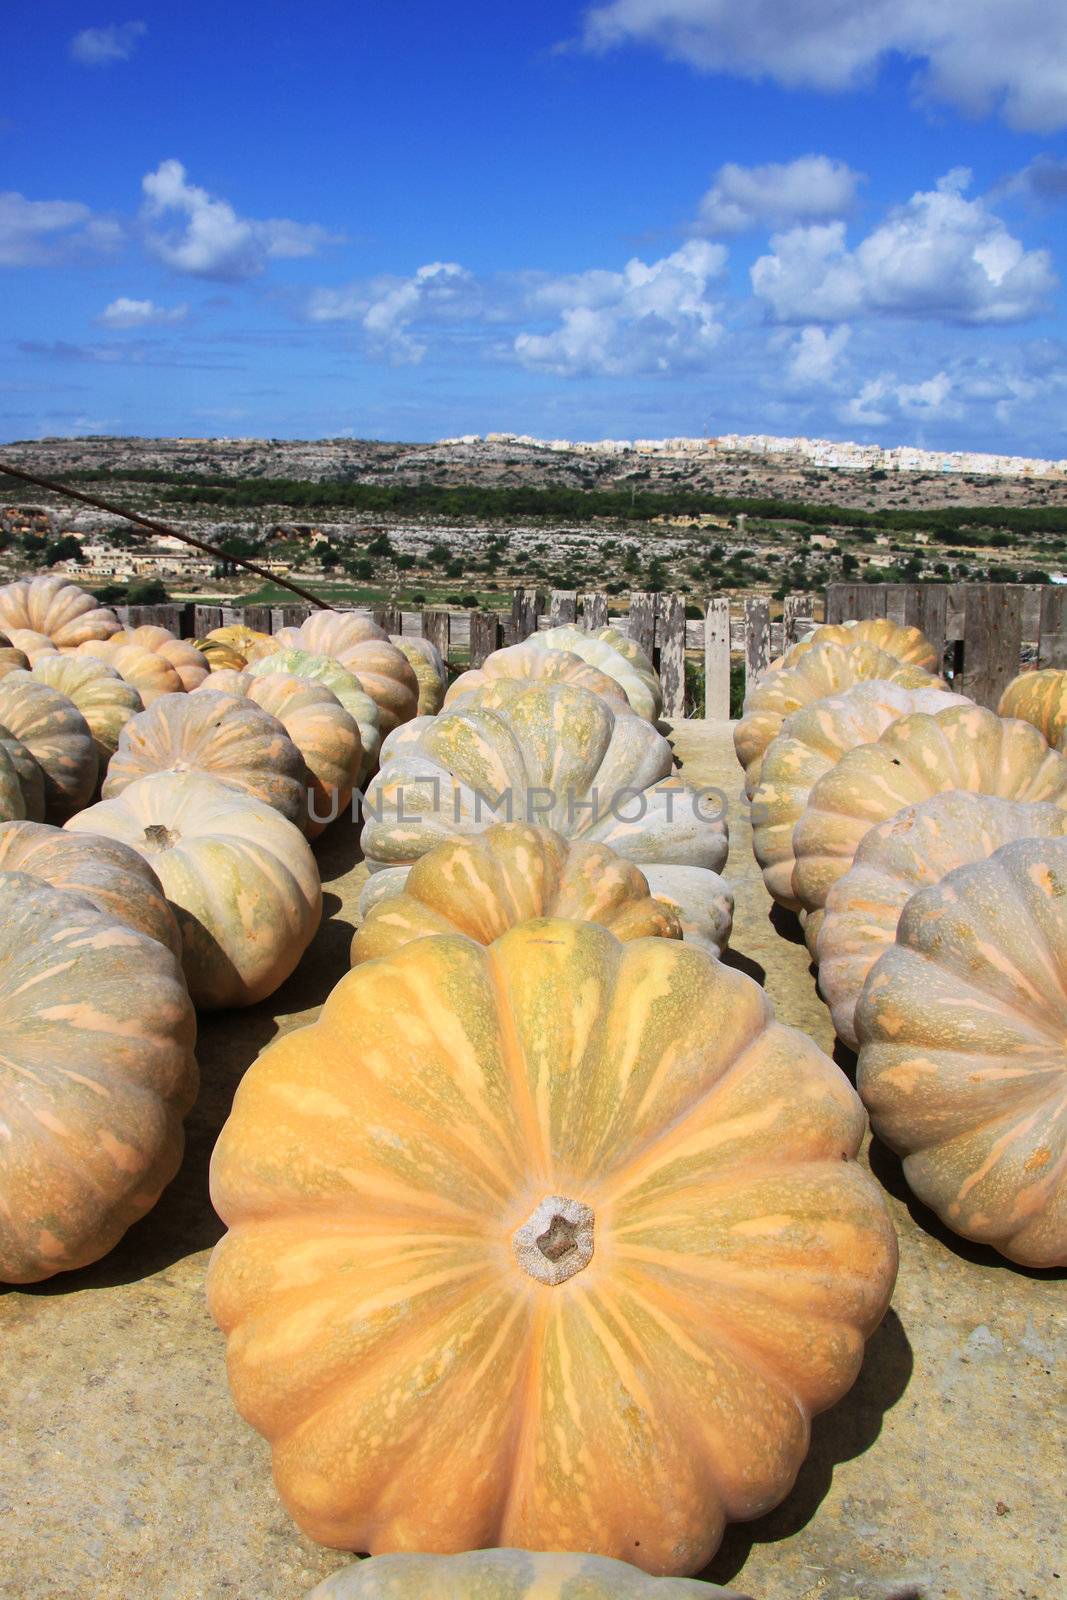 Pumpkins drying in the sun by annems